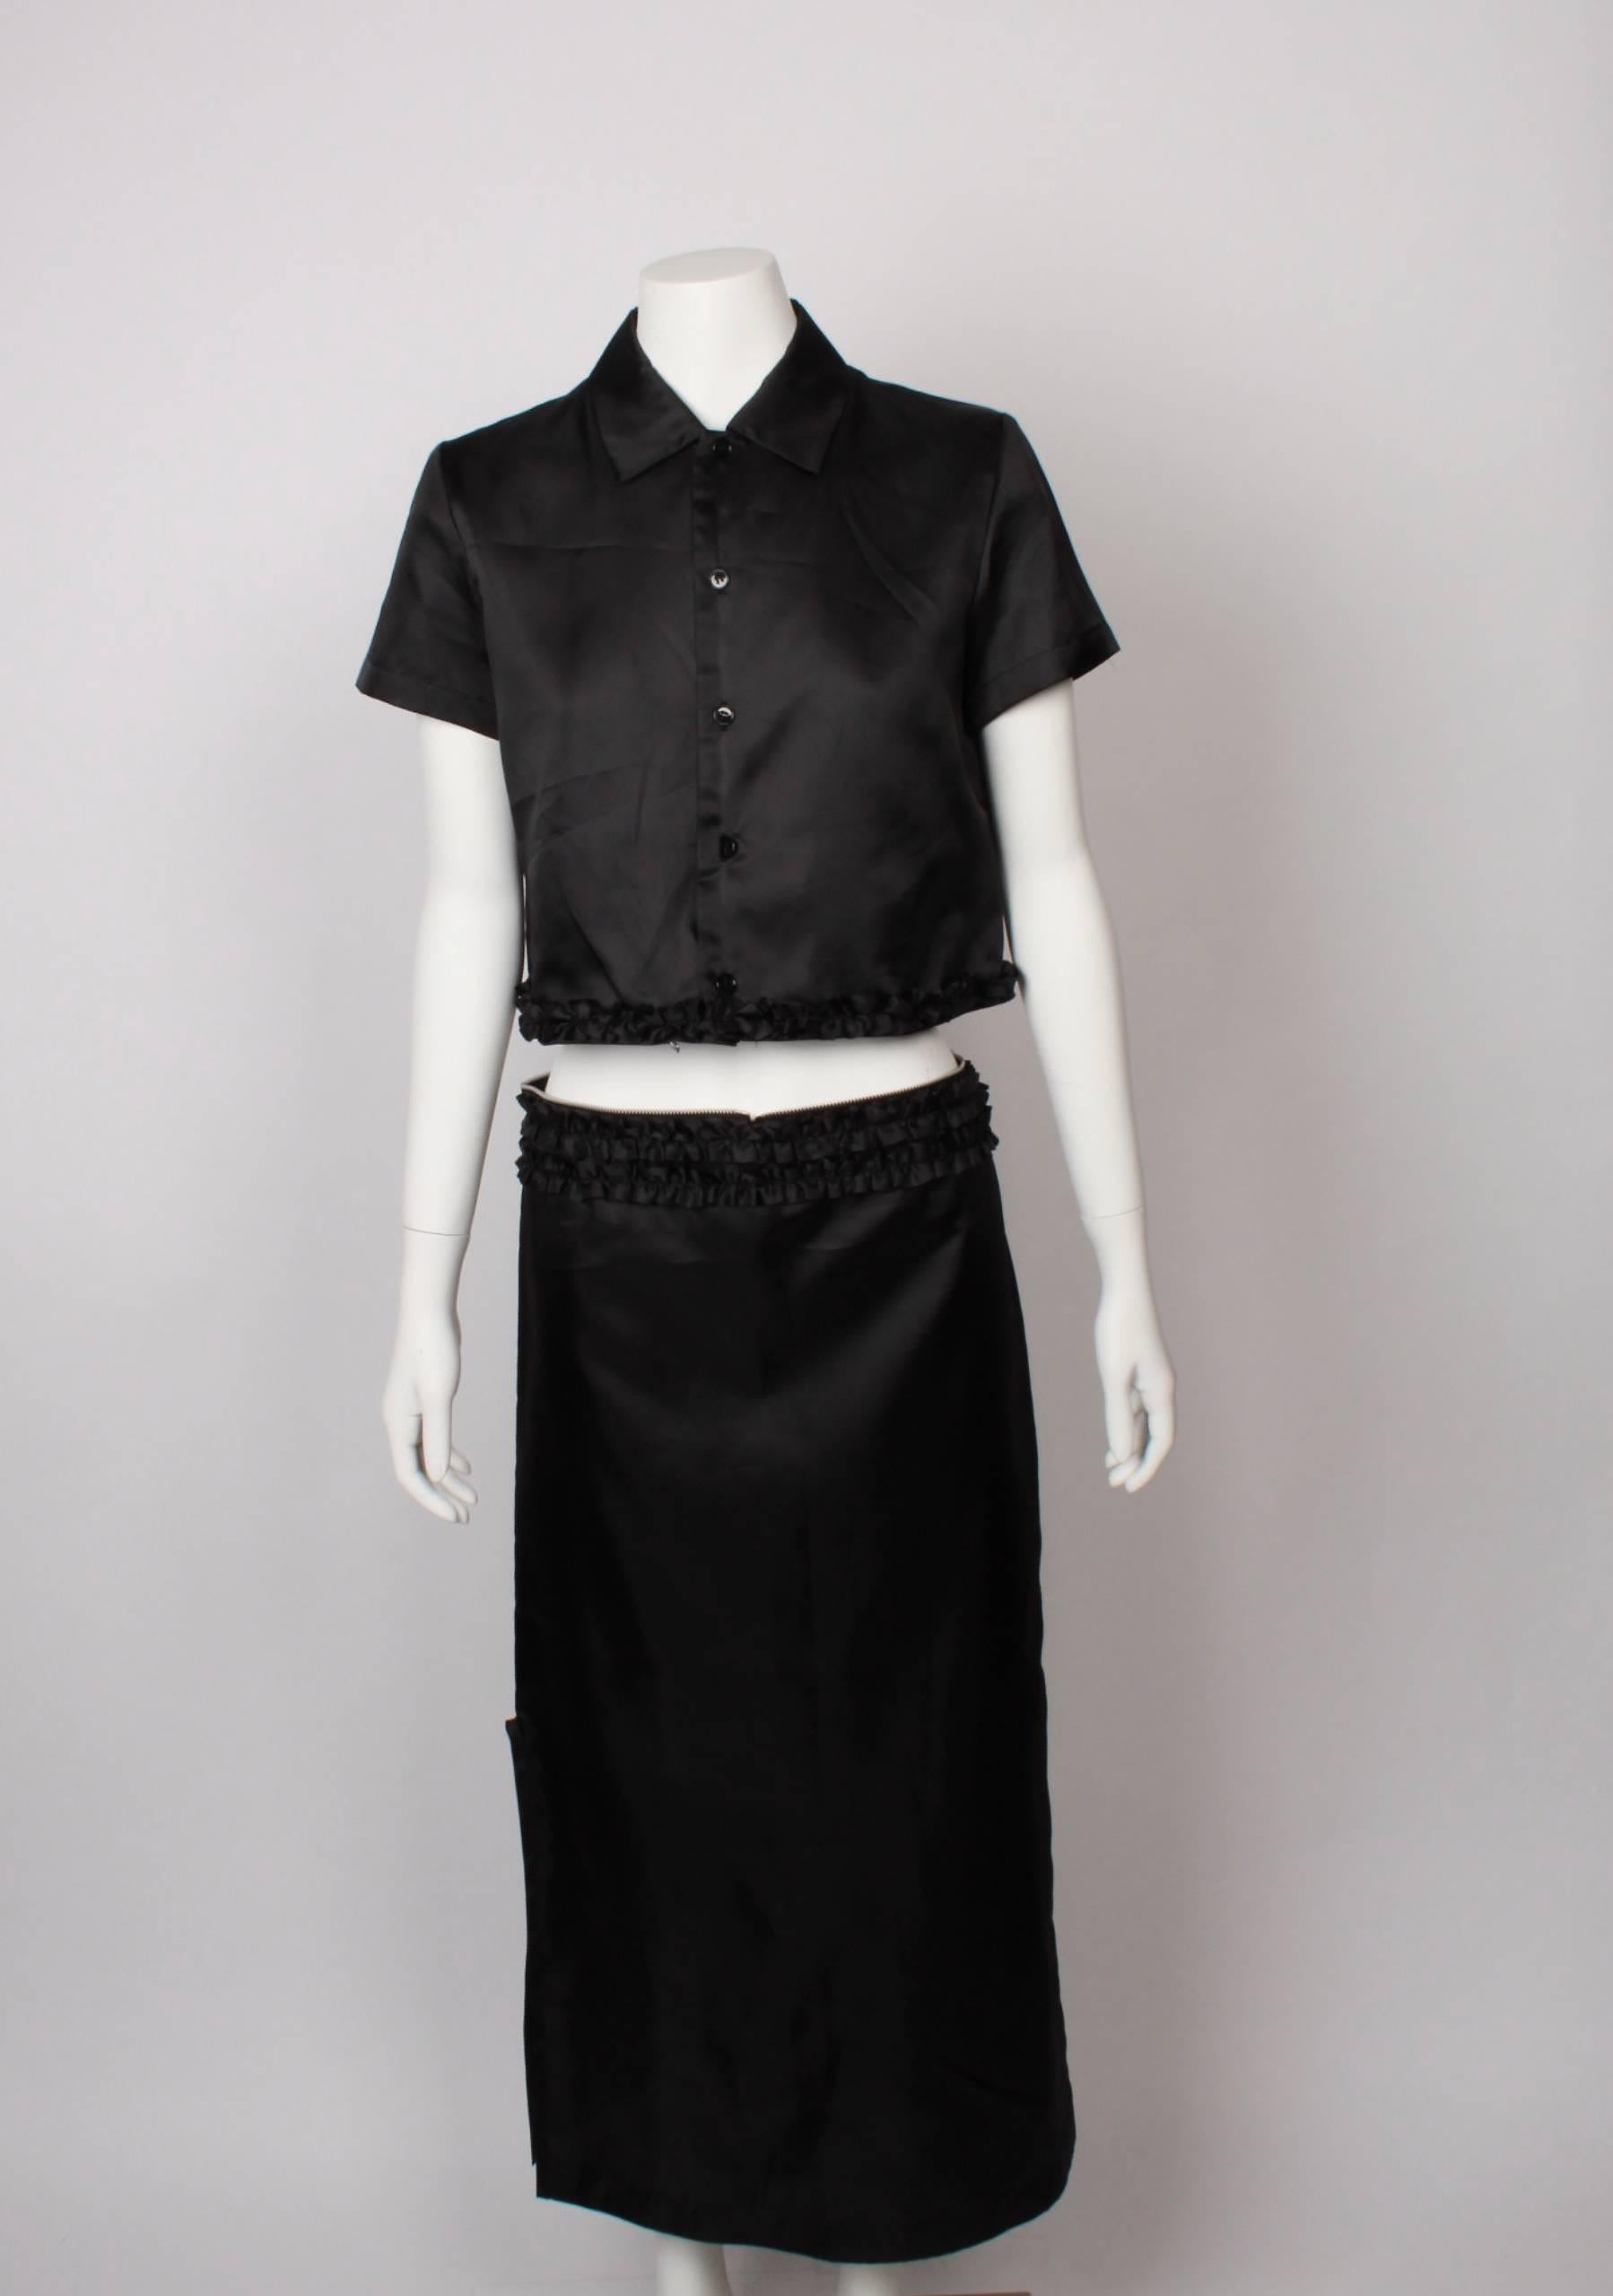 Comme des Garcons  Tricot 2 Piece Ruffle Dress  In Good Condition For Sale In Melbourne, Victoria